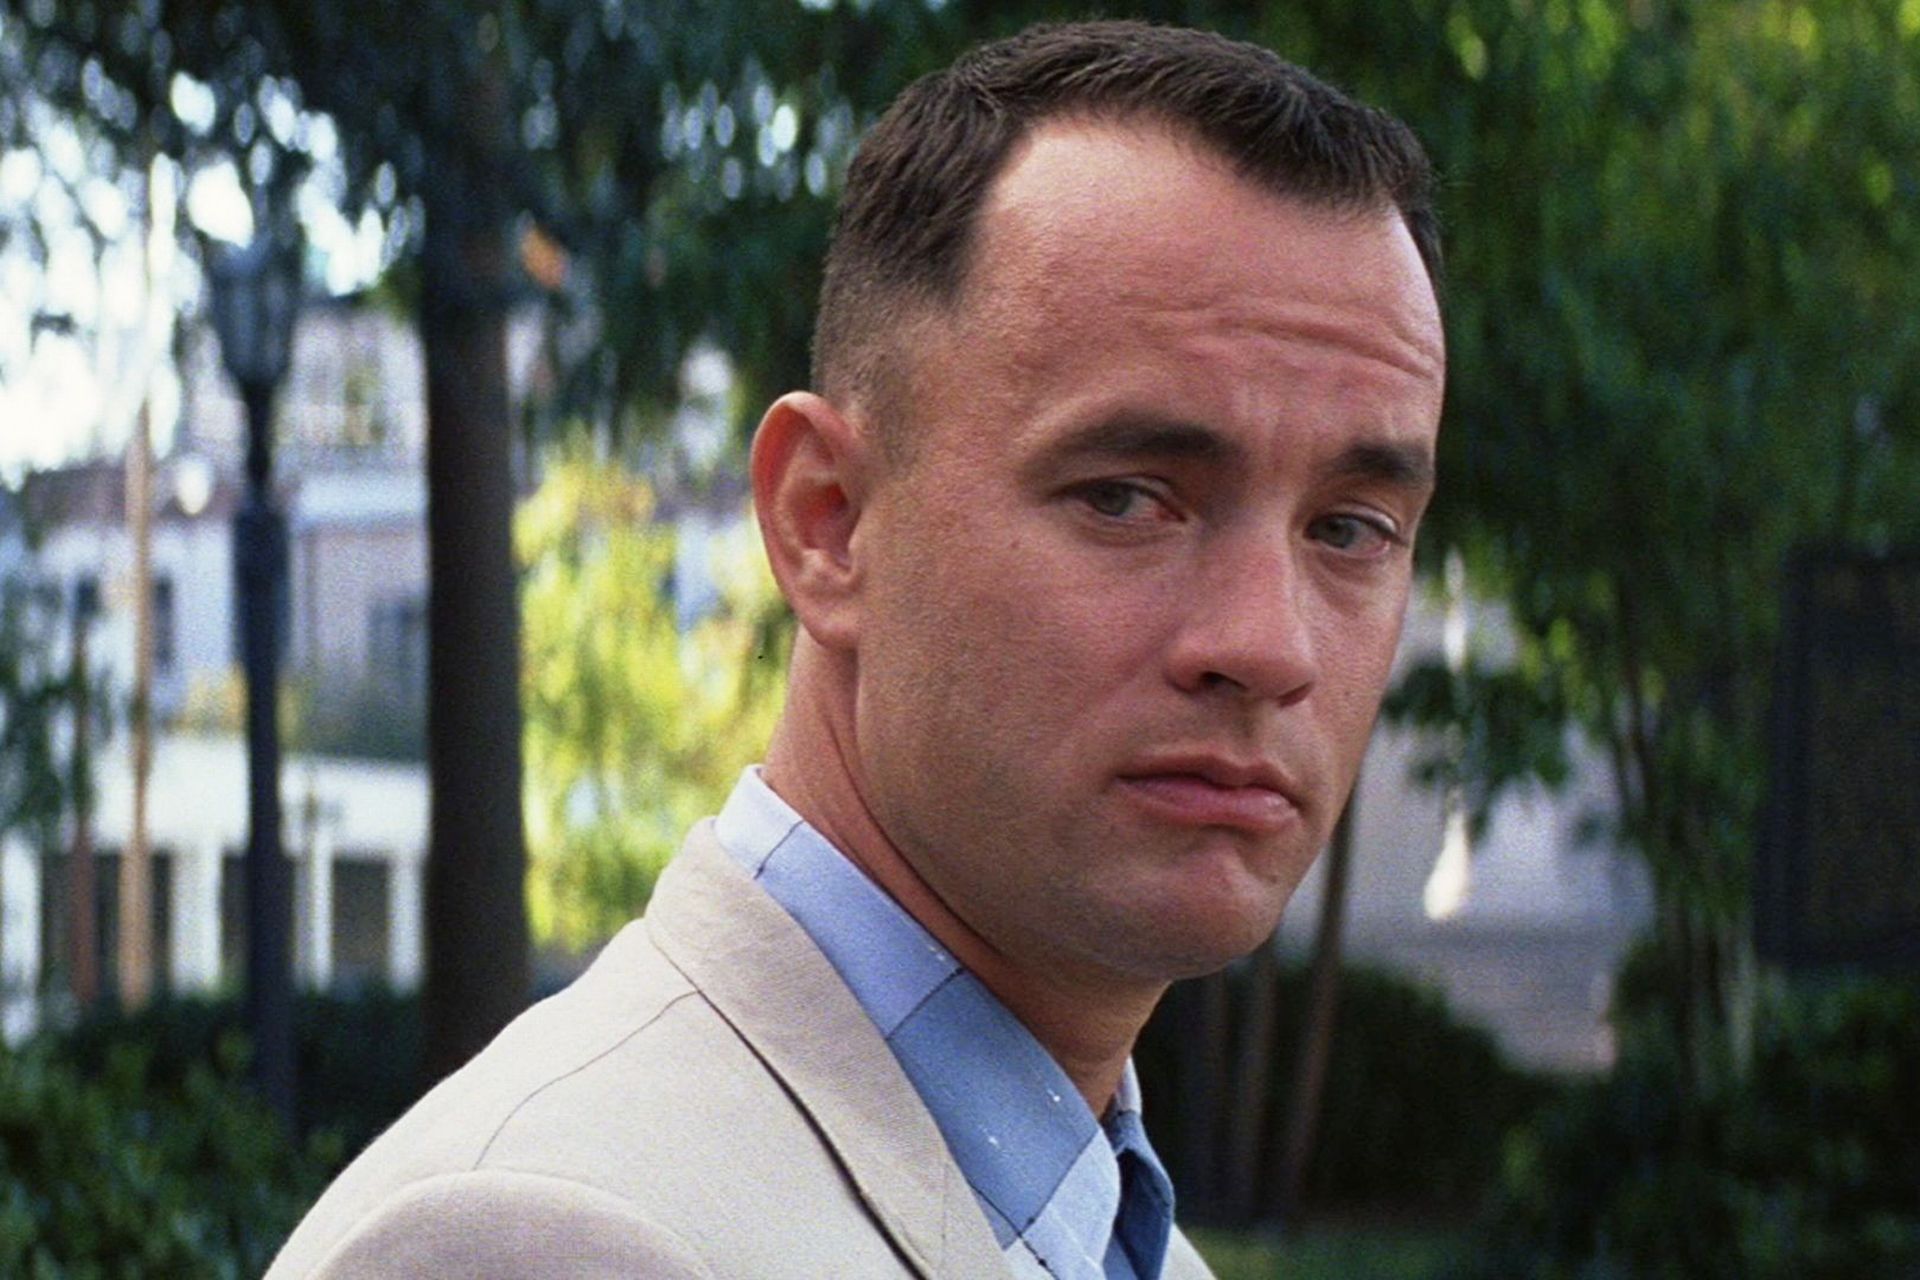 Why Forrest Gump is a poisonous film